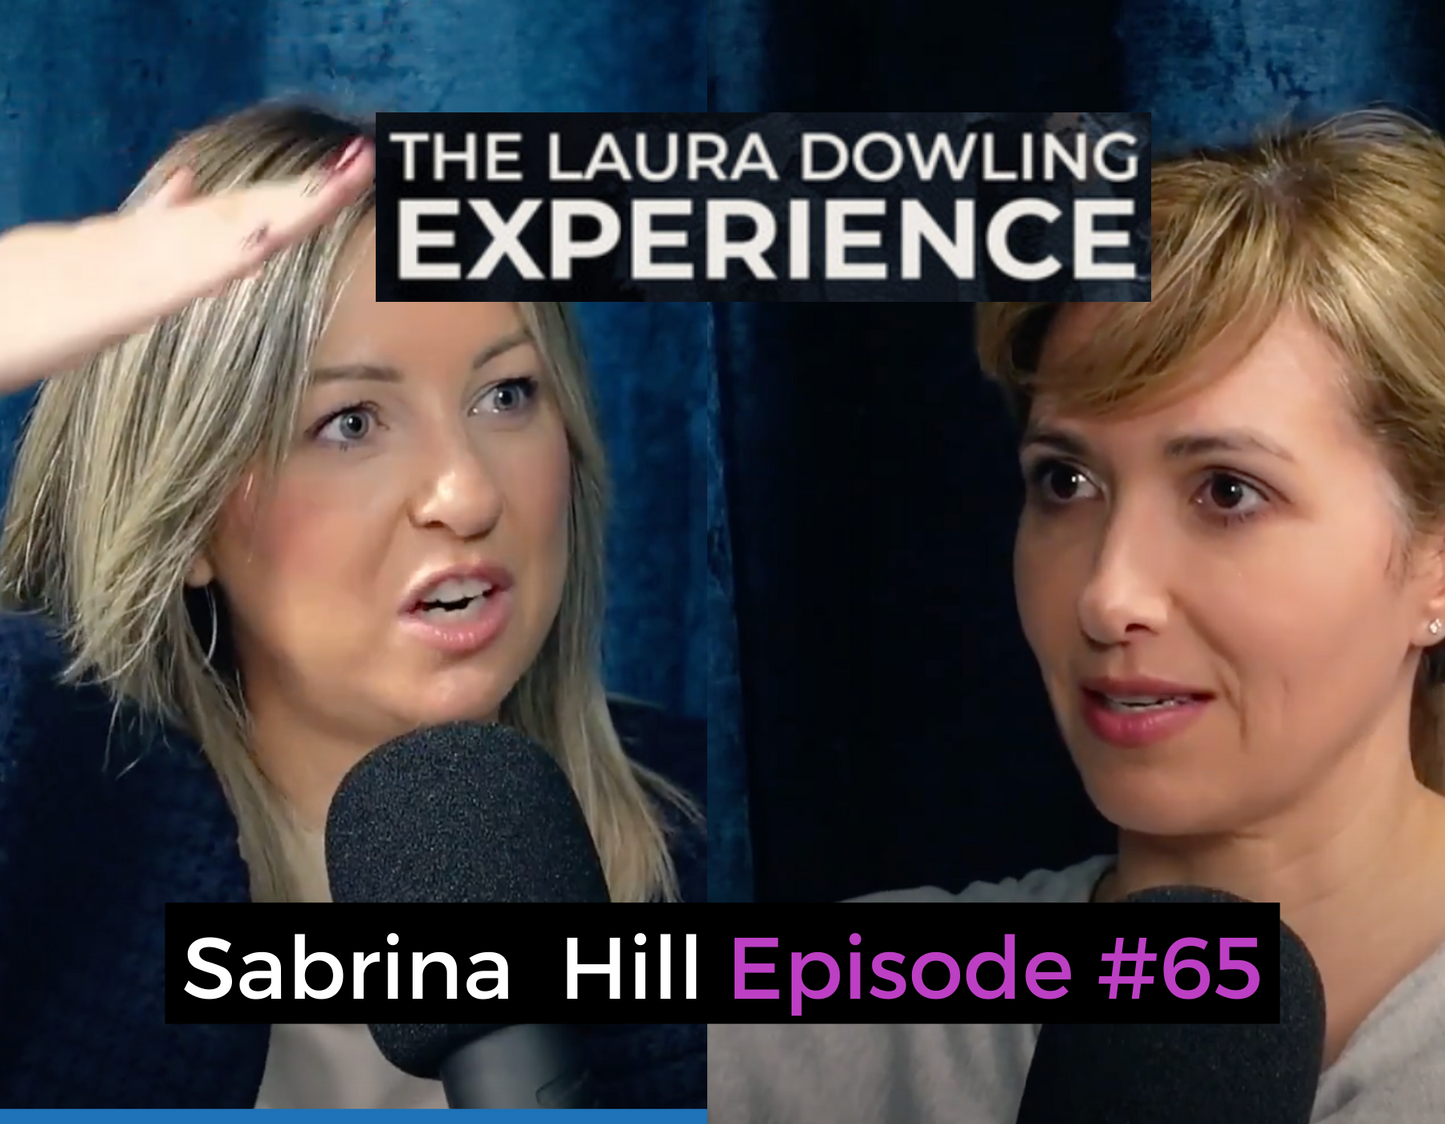 Sabrina Hill on Hyperemesis in pregnancy, Postnatal Depression & Water Damage on Hair! | The Laura Dowling Experience Episode 65